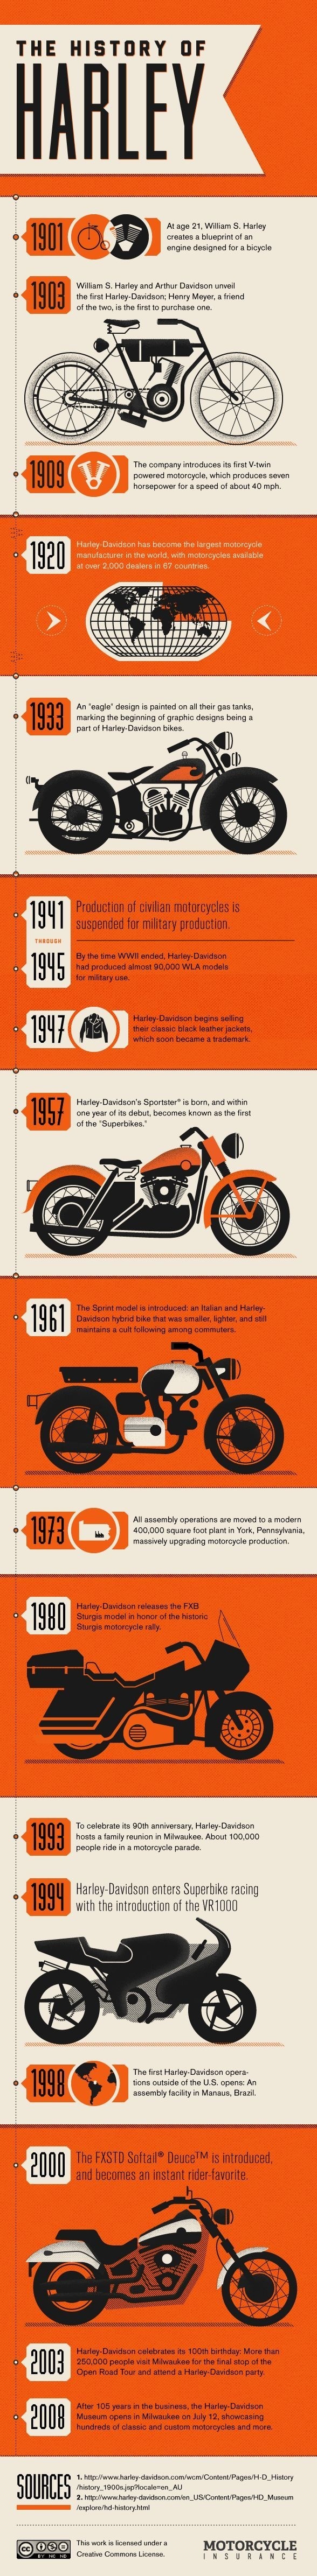 History of Harley #infographic